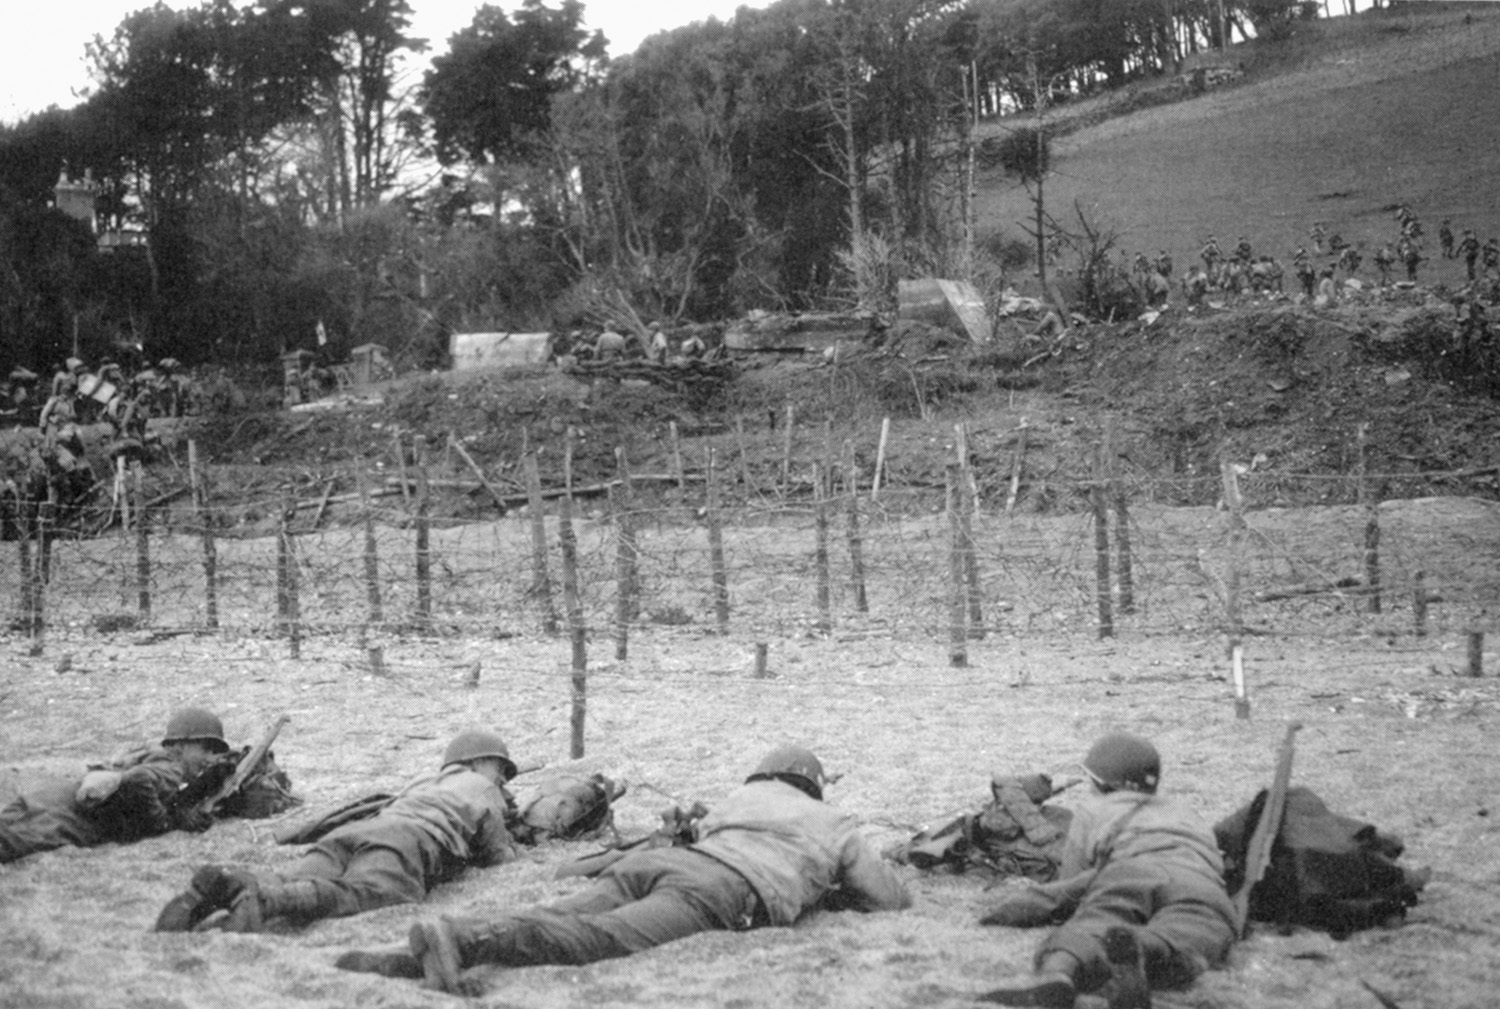 Lying low in front of beach obstructions during a live-fire exercise at Slapton Sands, U.S. soldiers await orders to advance. 